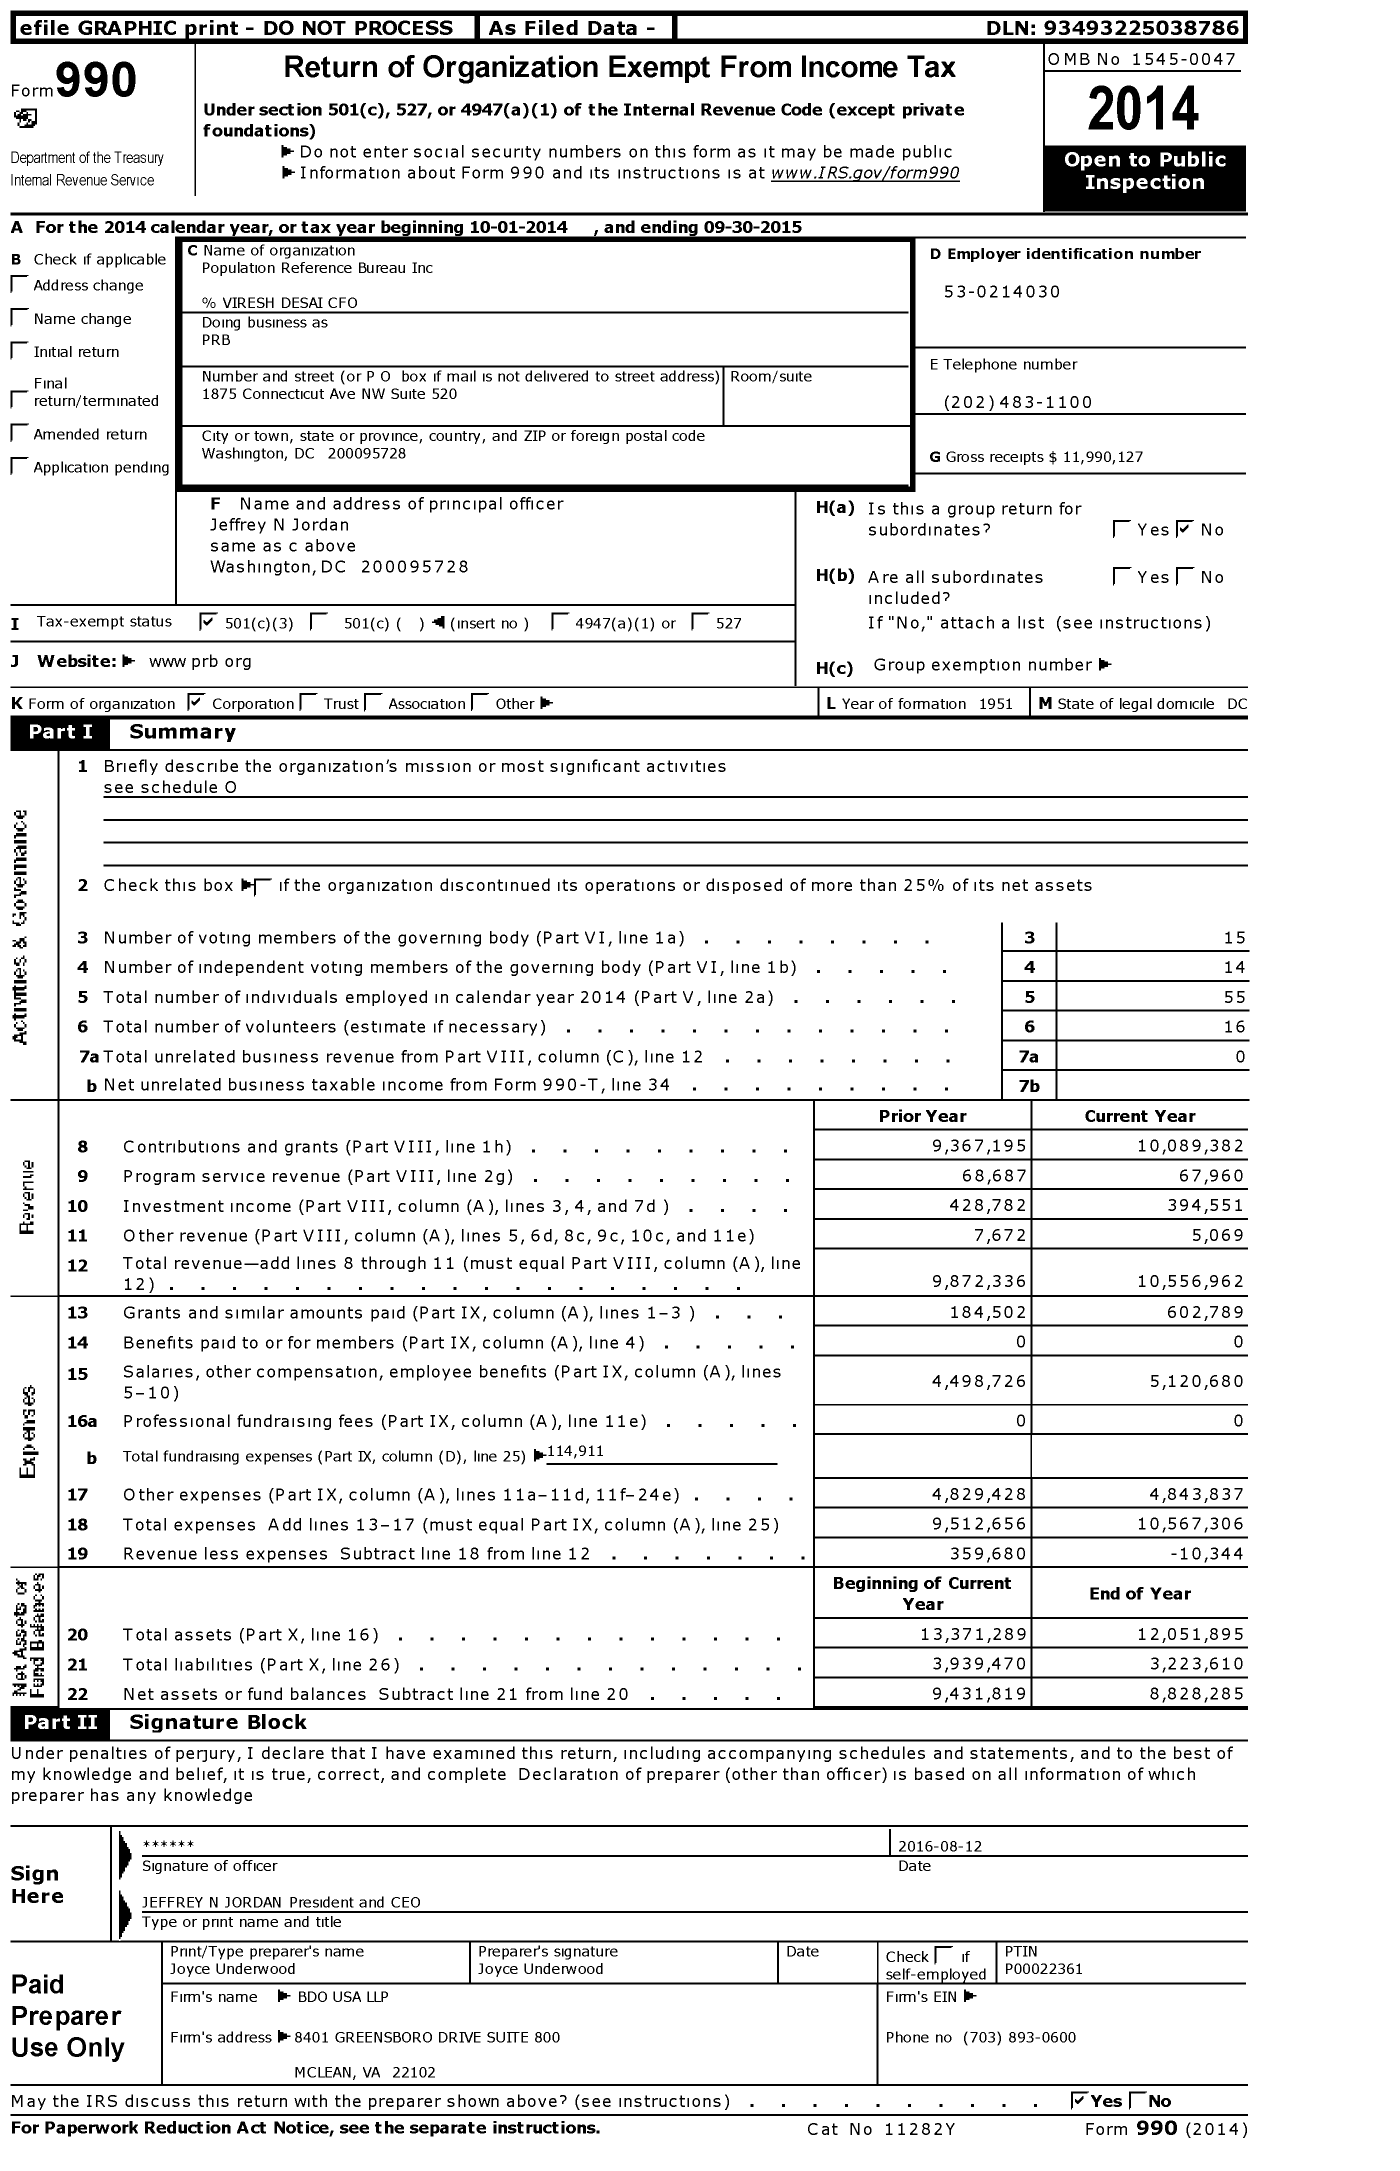 Image of first page of 2014 Form 990 for Population Reference Bureau (PRB)